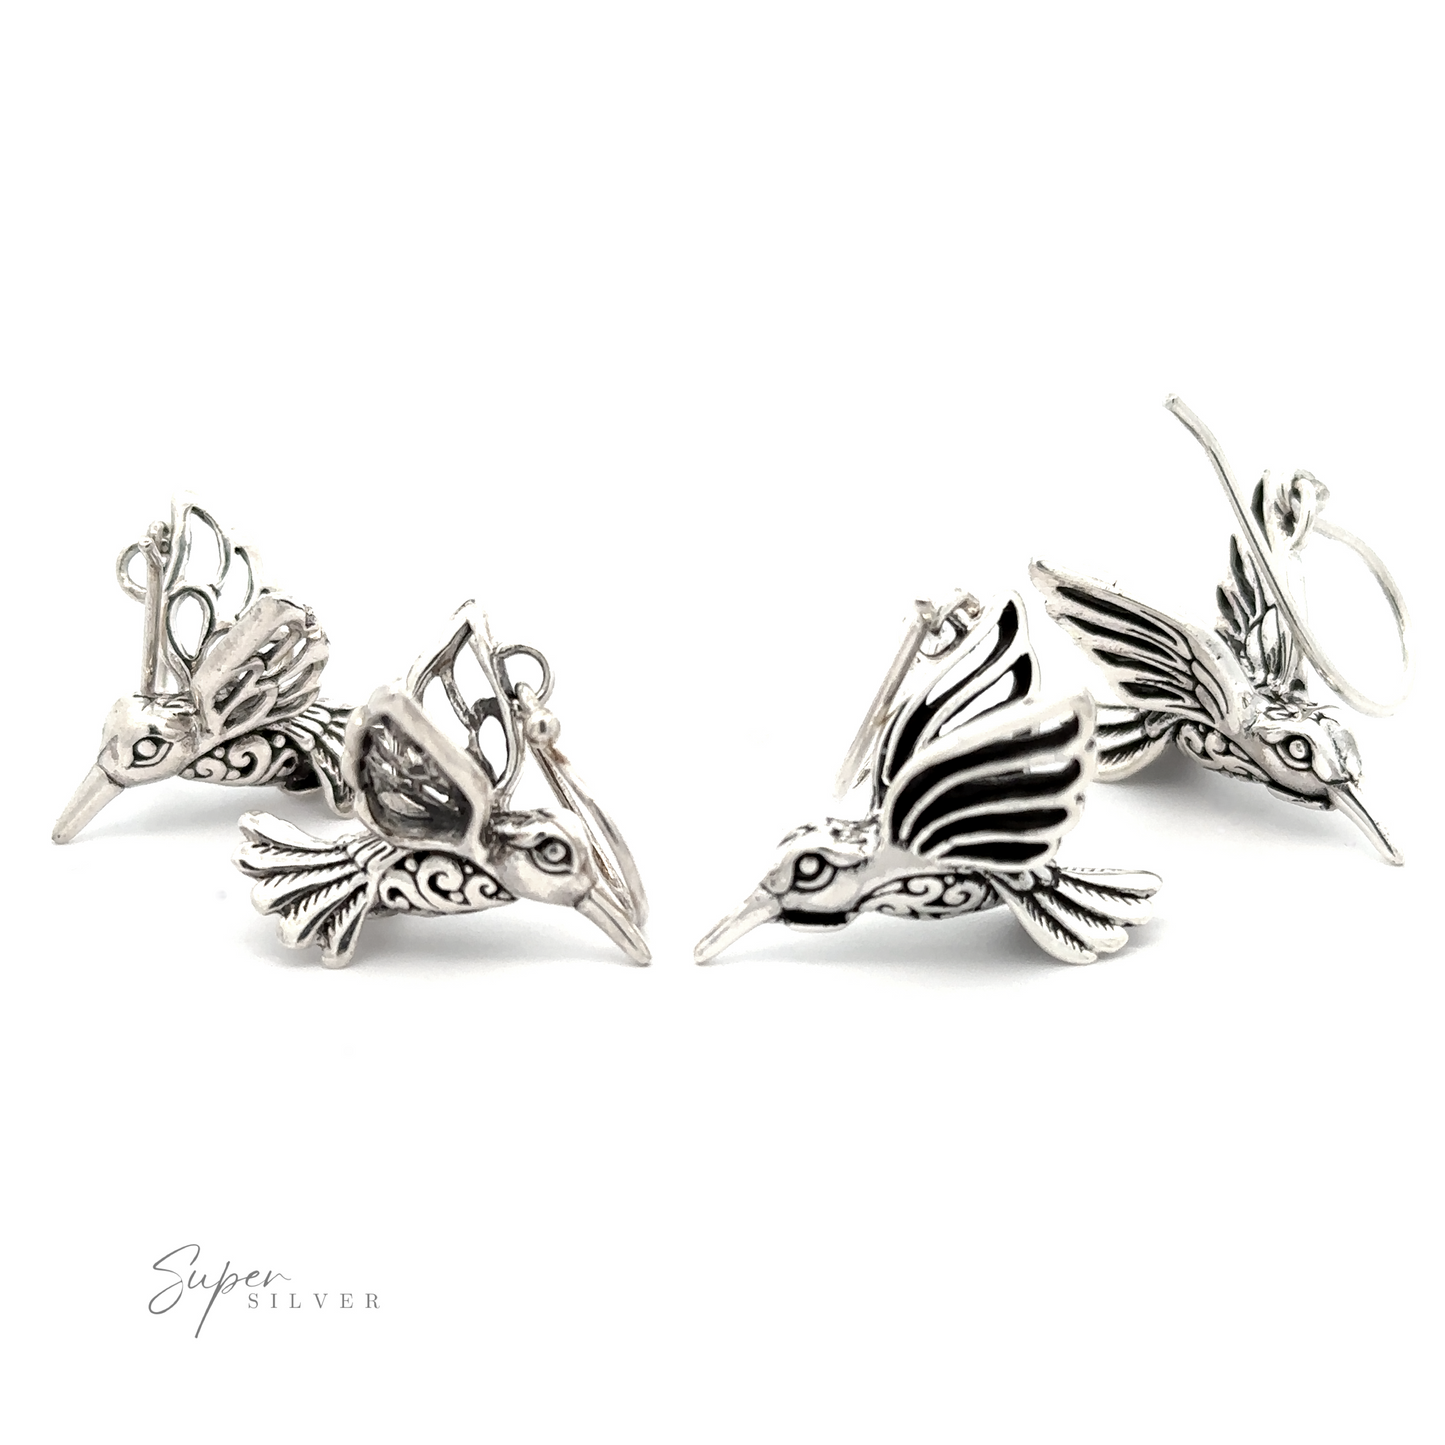 
                  
                    Four Filigree Hummingbird Earrings are arranged against a white background, featuring intricate filigree designs with wings spread. The brand name "Super Silver" is visible in the lower left corner.
                  
                